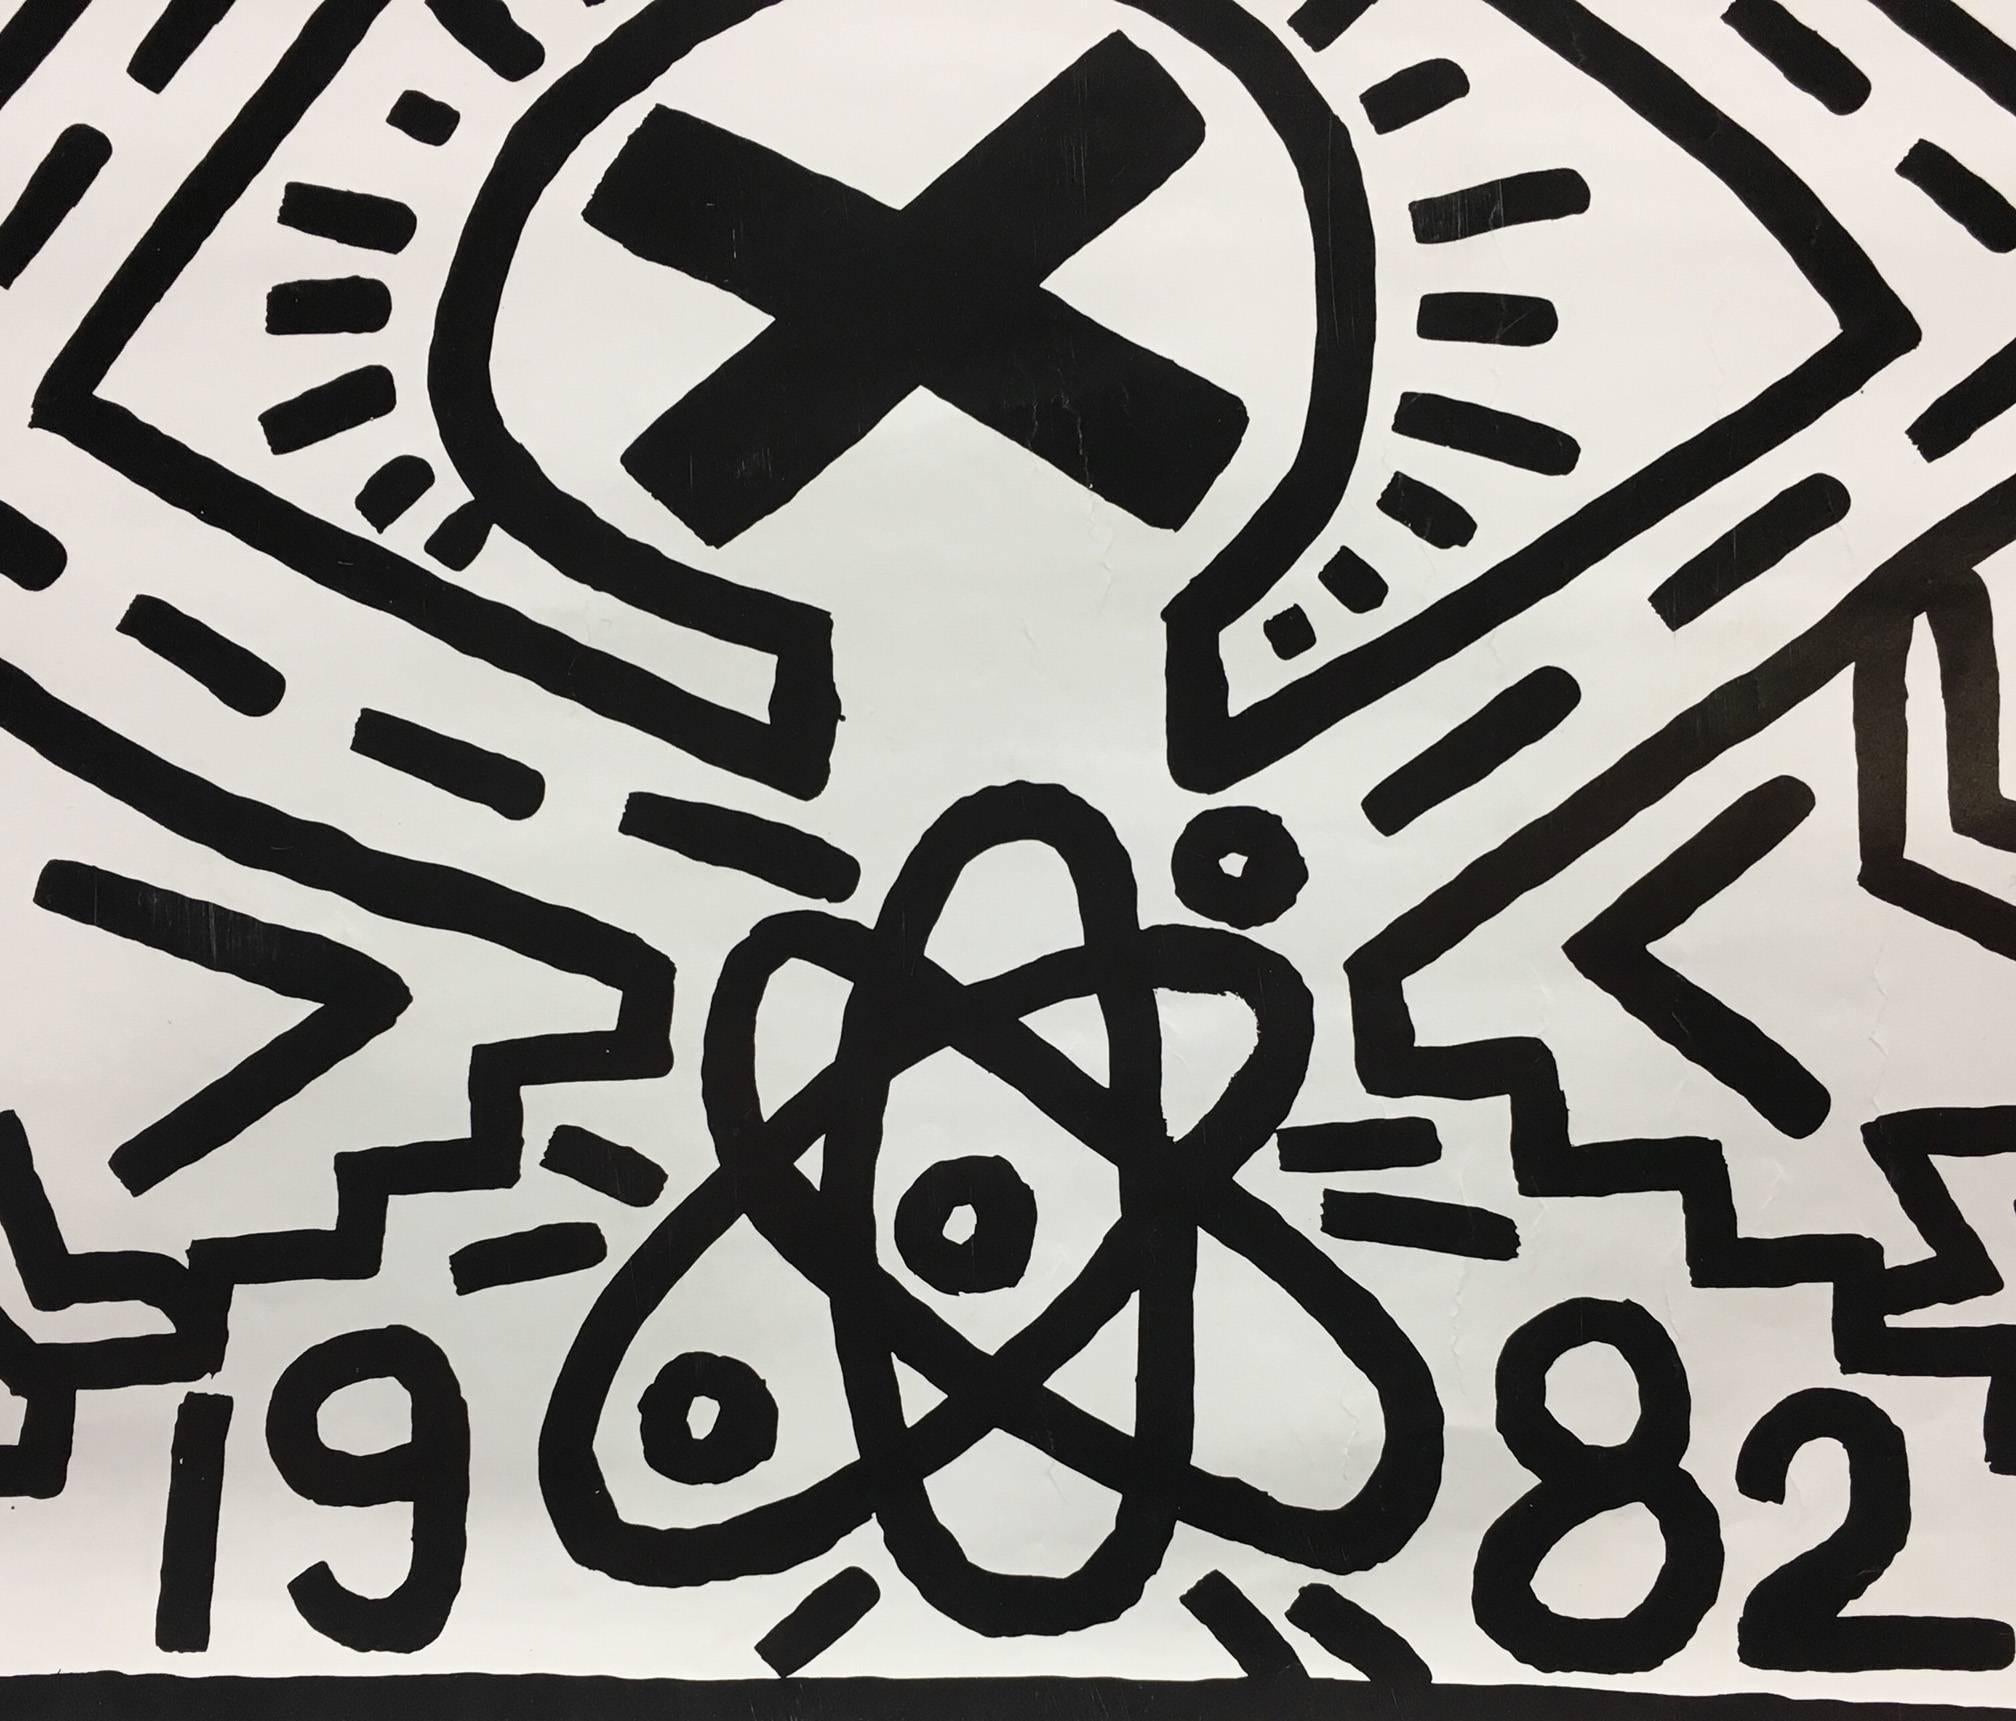 Keith Haring Anti-Nuclear Rally, NY, 1982
In 1982 Haring created this poster for Nuclear Disarmament, which features his signature Radiant Baby in a mushroom cloud. “Babies represent the possibility of the future,” Haring said, “the understanding of